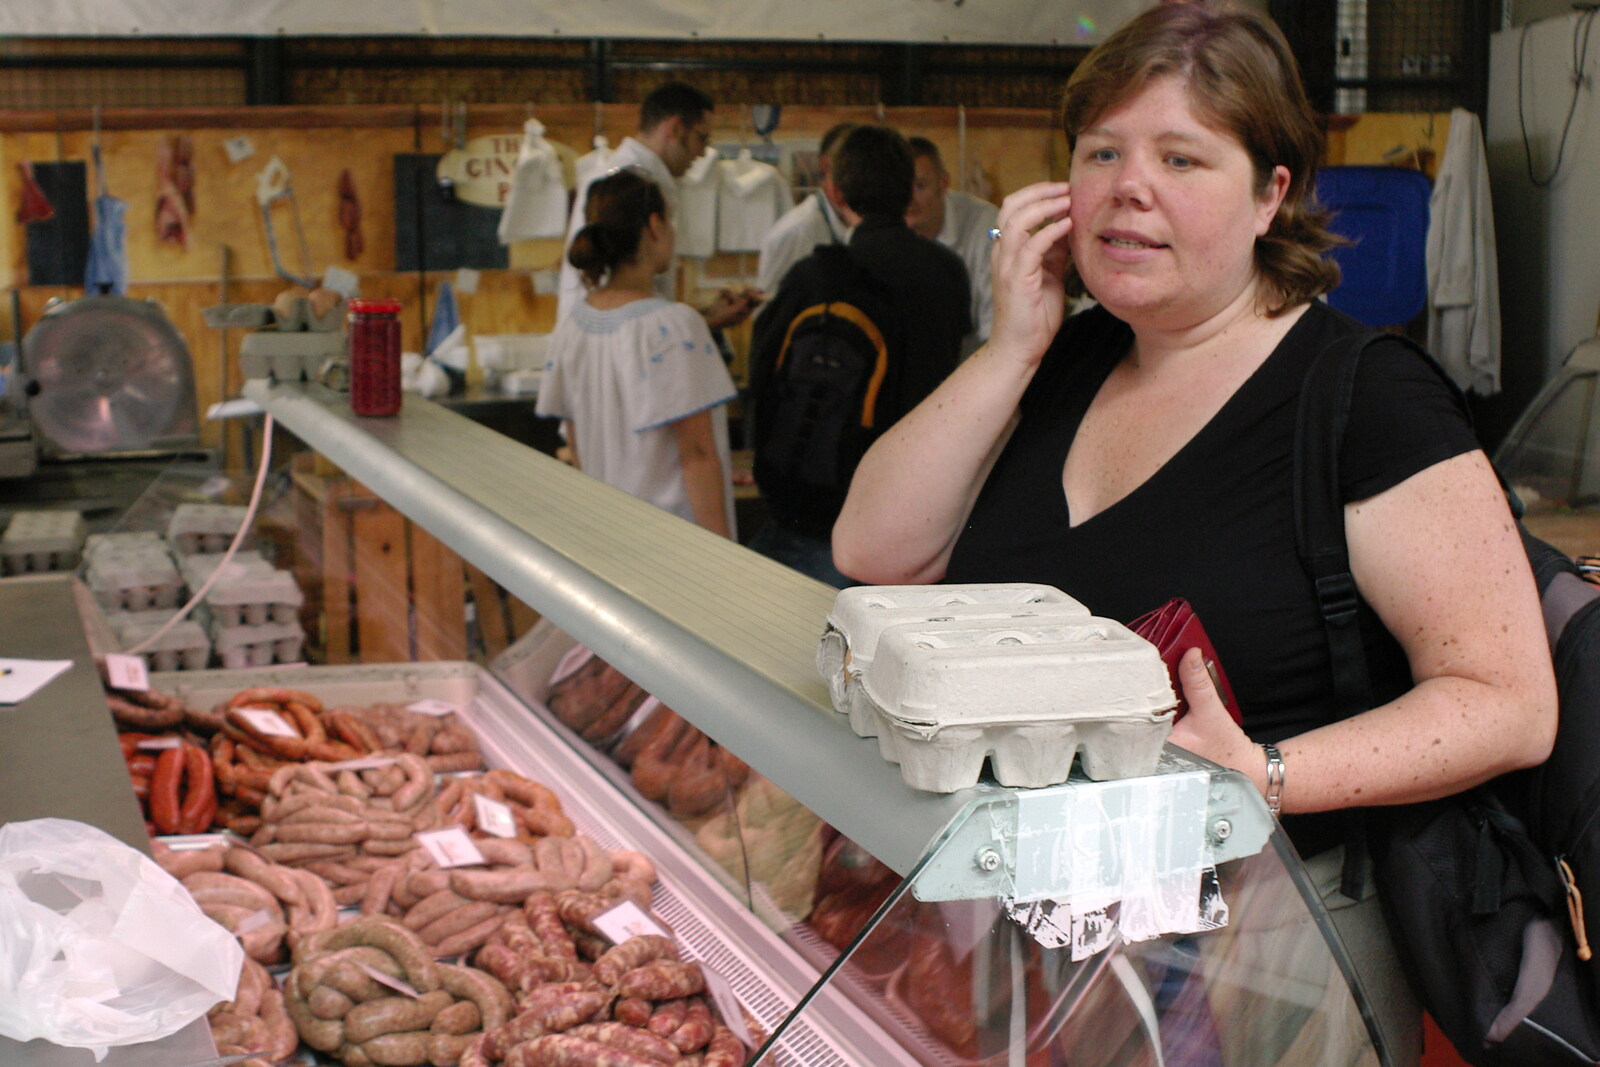 Sis at the sausage counter from Borough Market and North Clapham Tapas, London - 23rd July 2005